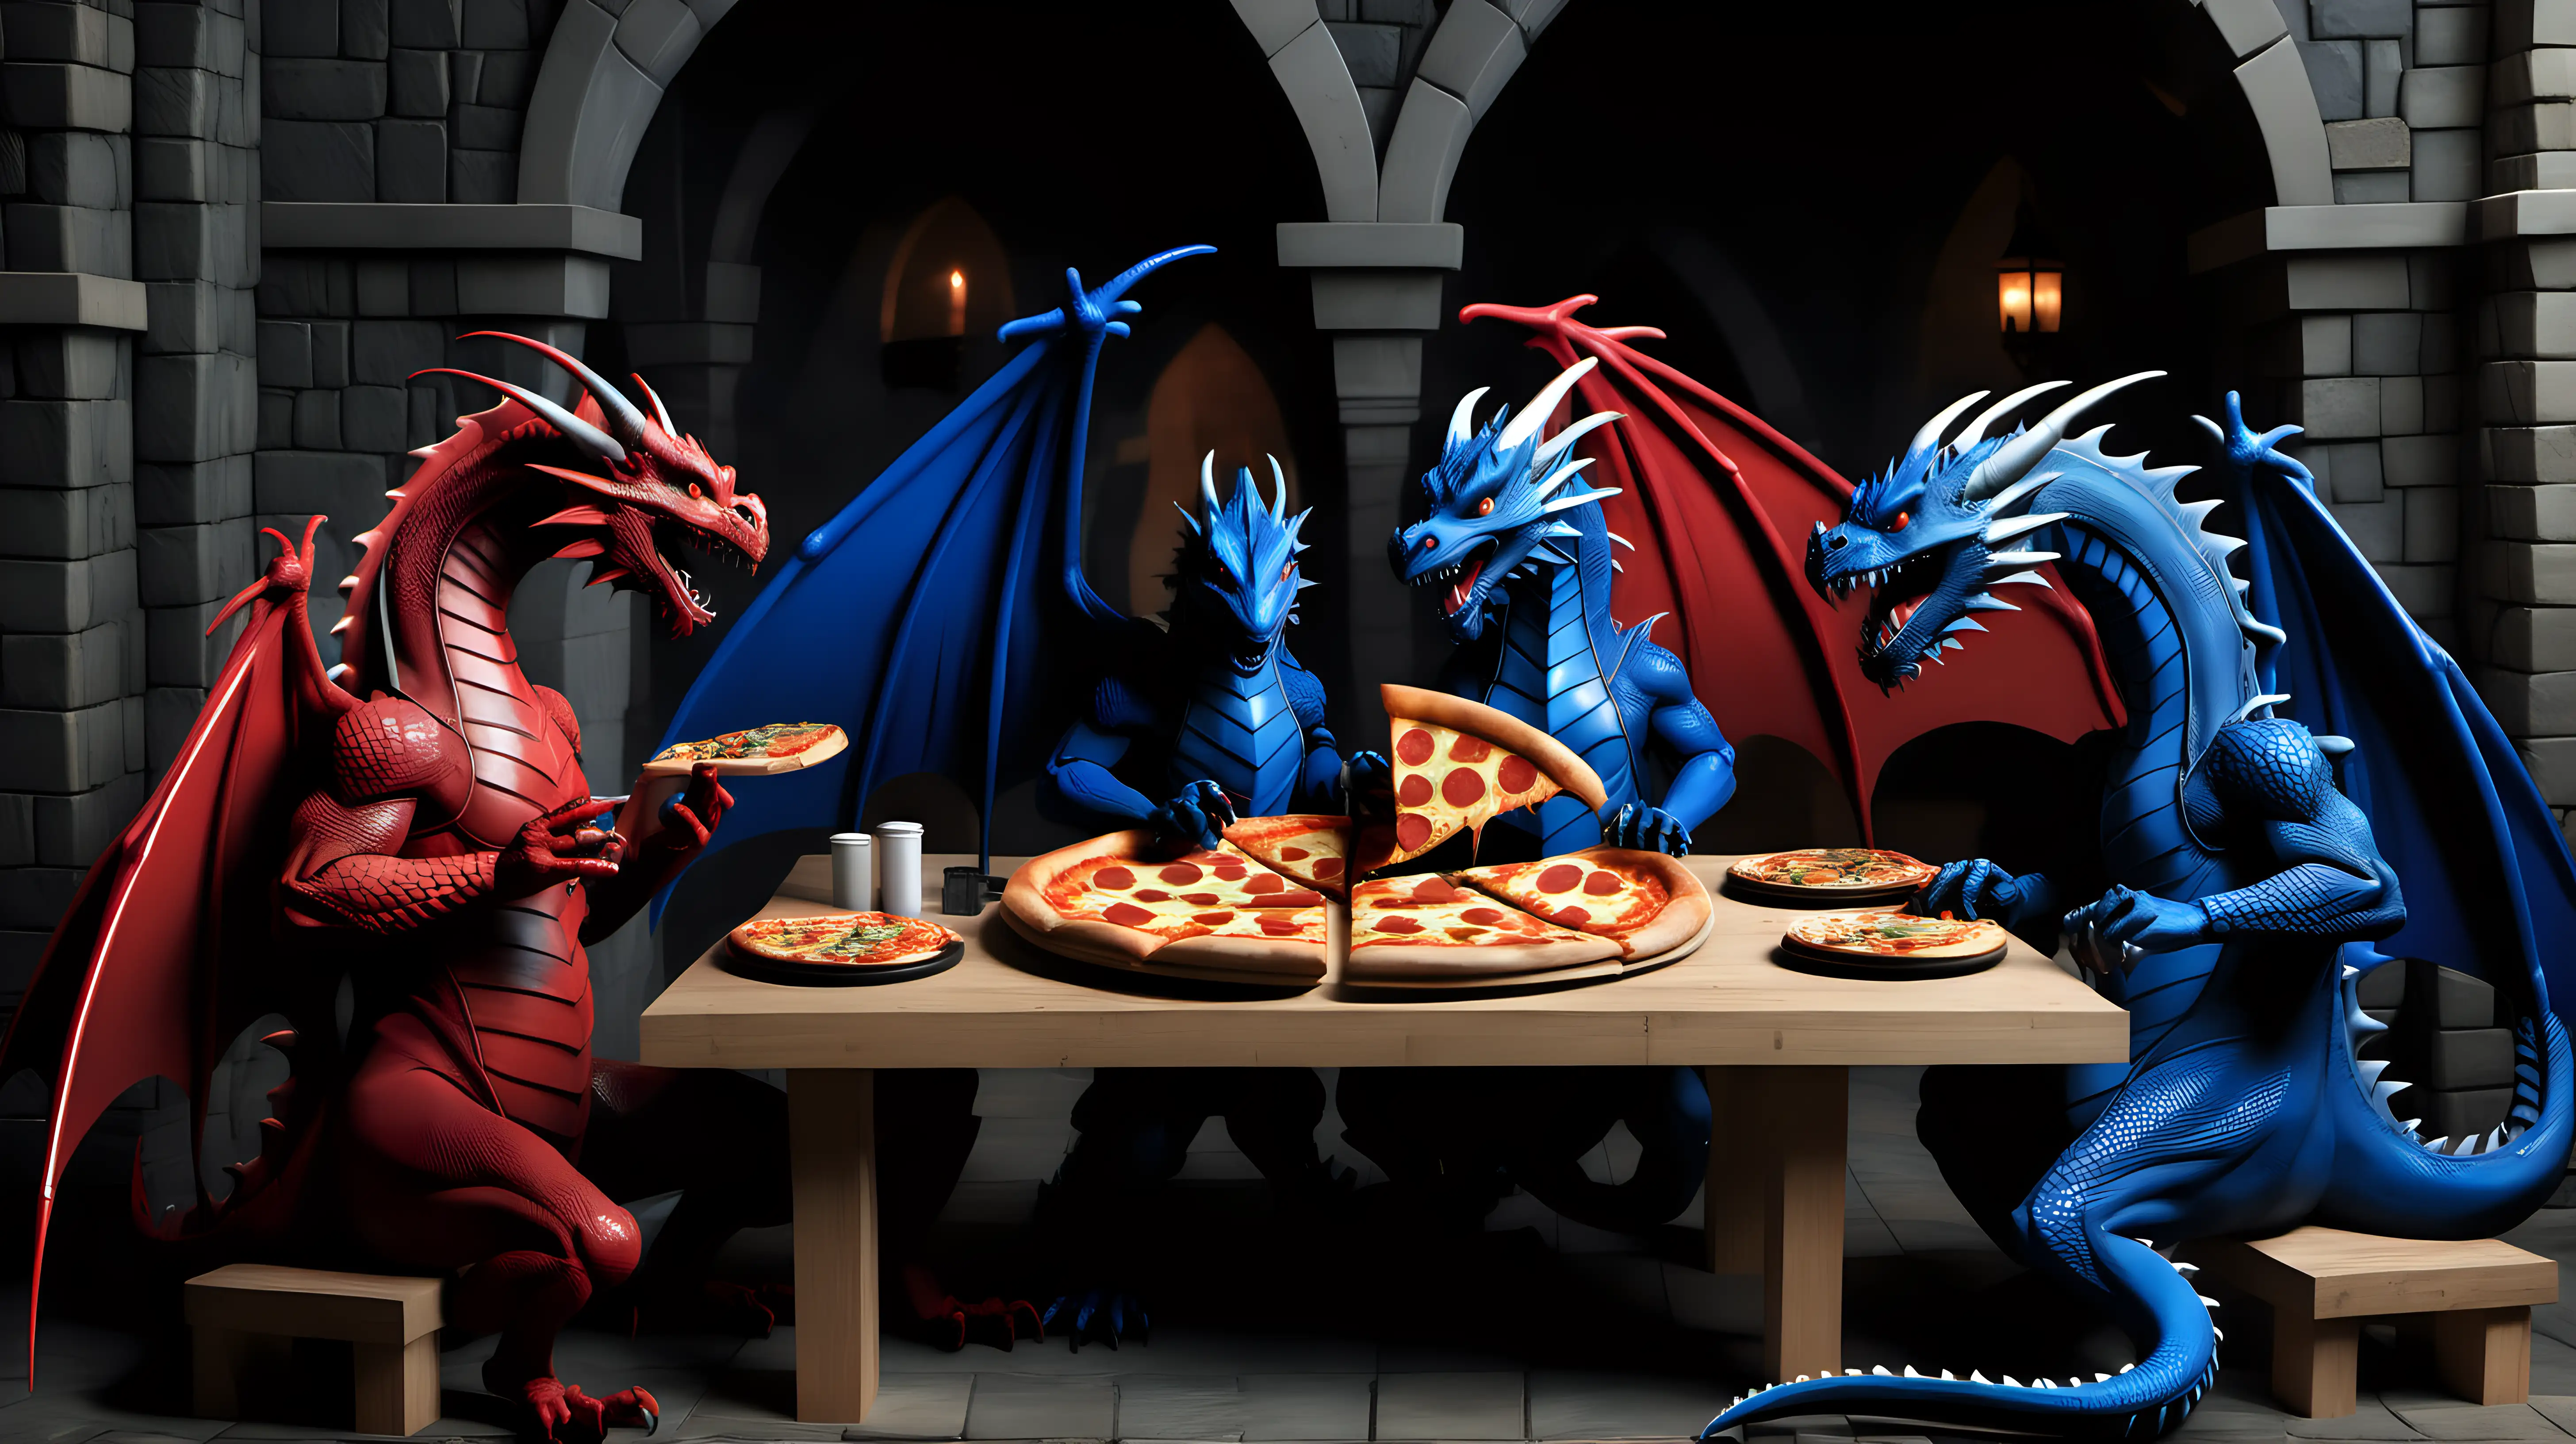 large red, blue and black dragons sitting around table inside castle eating pizza.